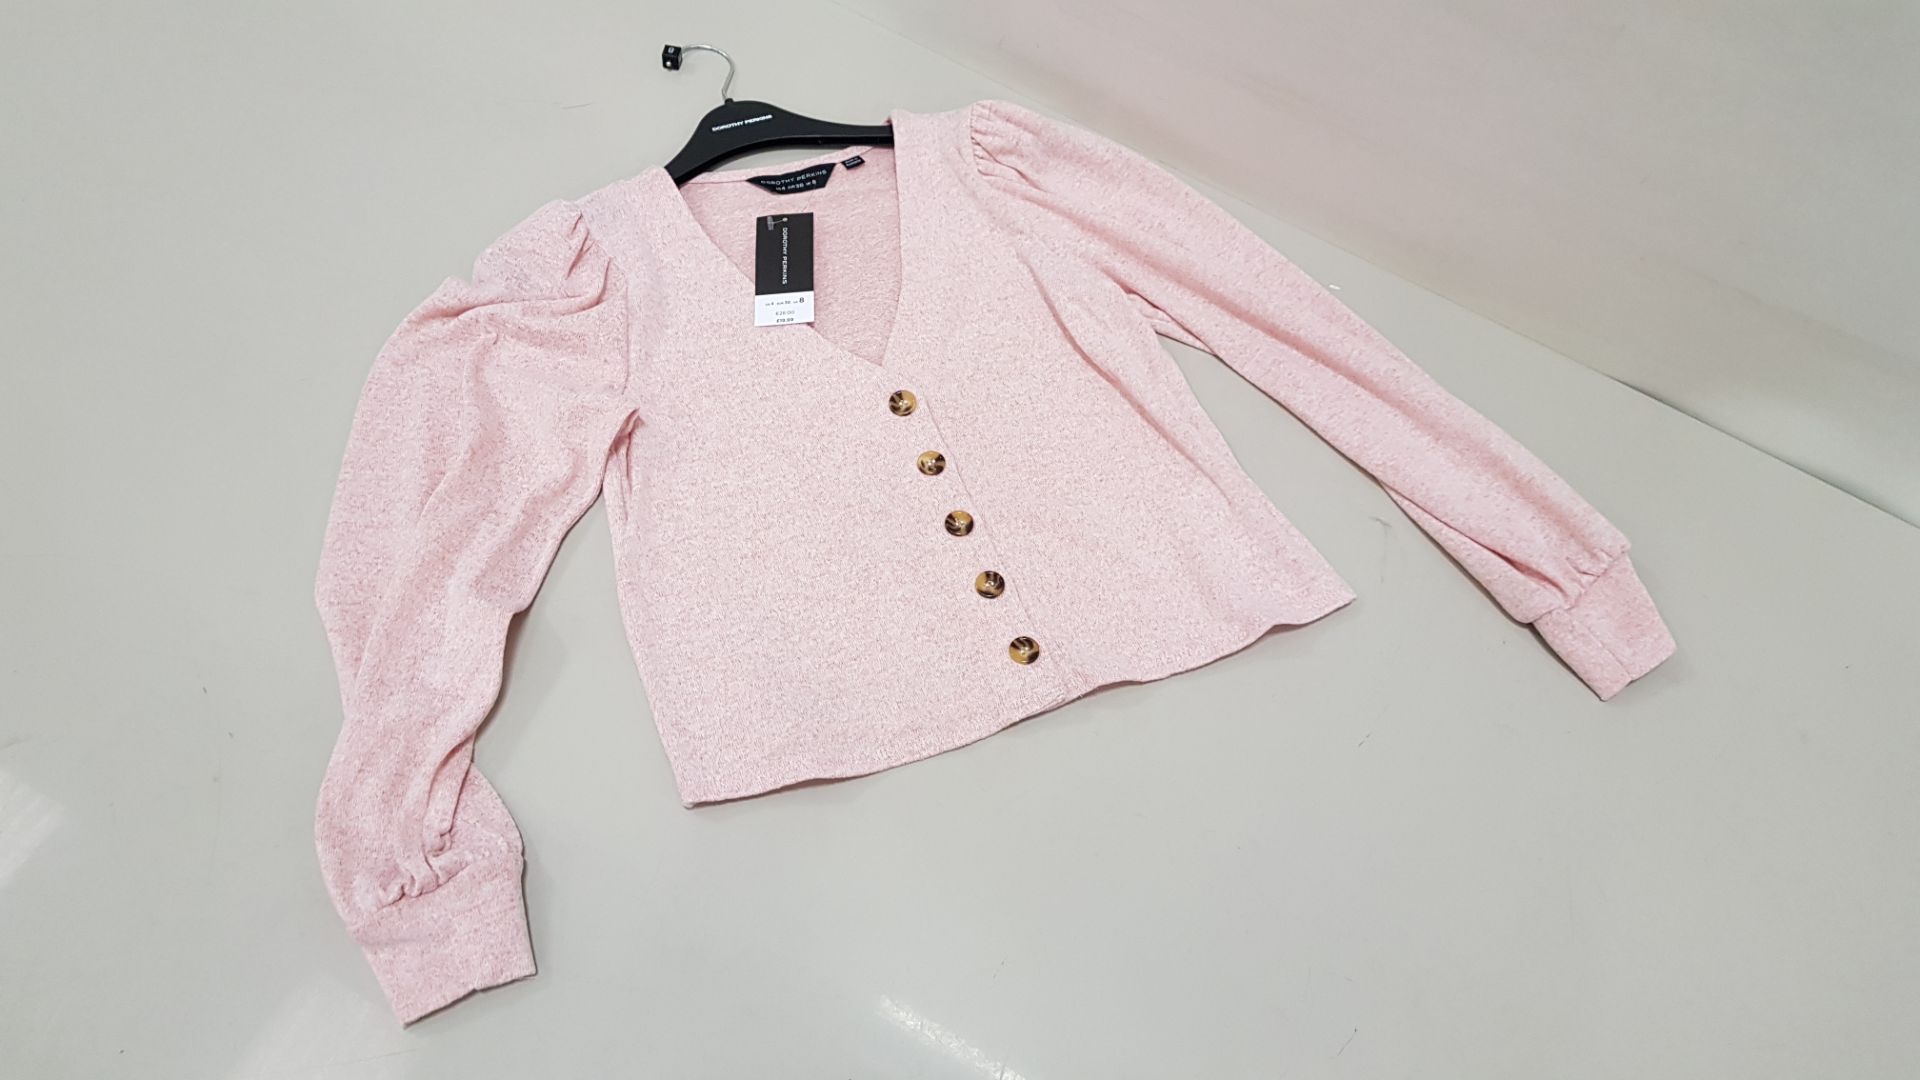 20 X BRAND NEW DOROTHY PERKINS PINK SUMMER CARDIGAN (SIZE UK 14 & 16) RRP £19.99 (TOTAL RRP £399.